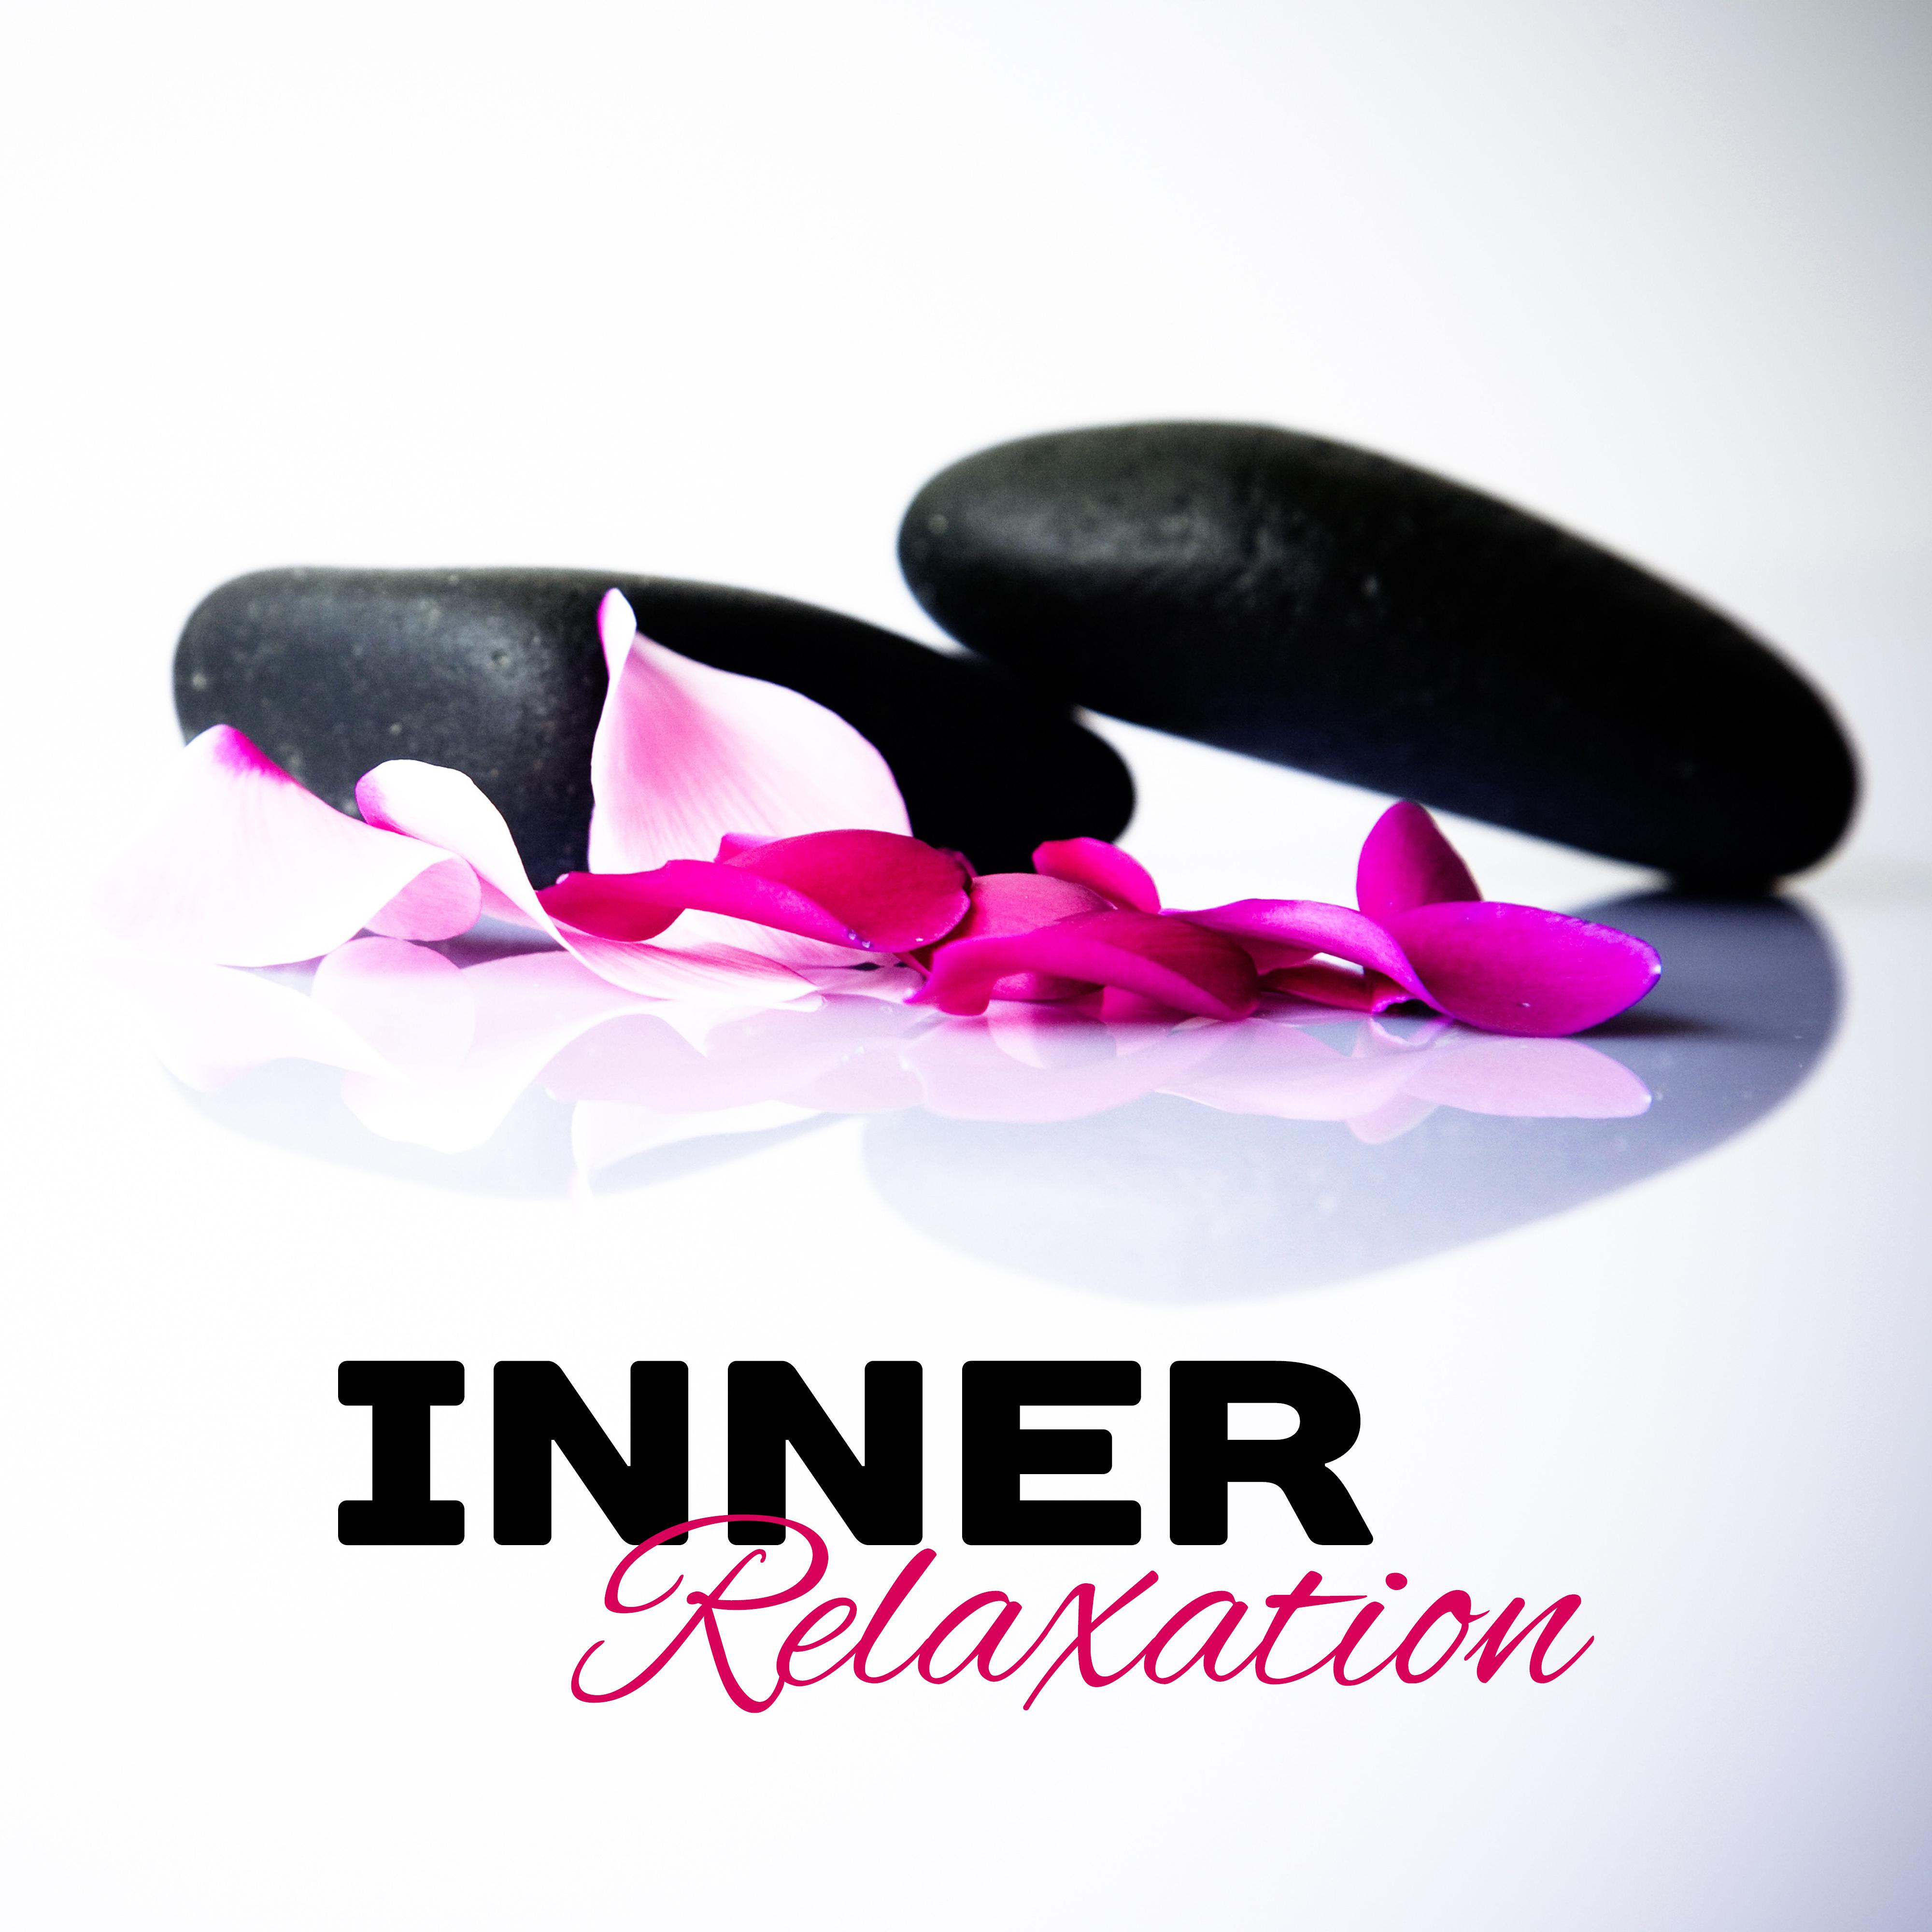 Inner Relaxation – Peaceful Music for Spa, Sleep, Wellness, Deep Massage, Relief, Zen Music to Calm Down, Soft Nature Sounds for Healing, Spa Dreams